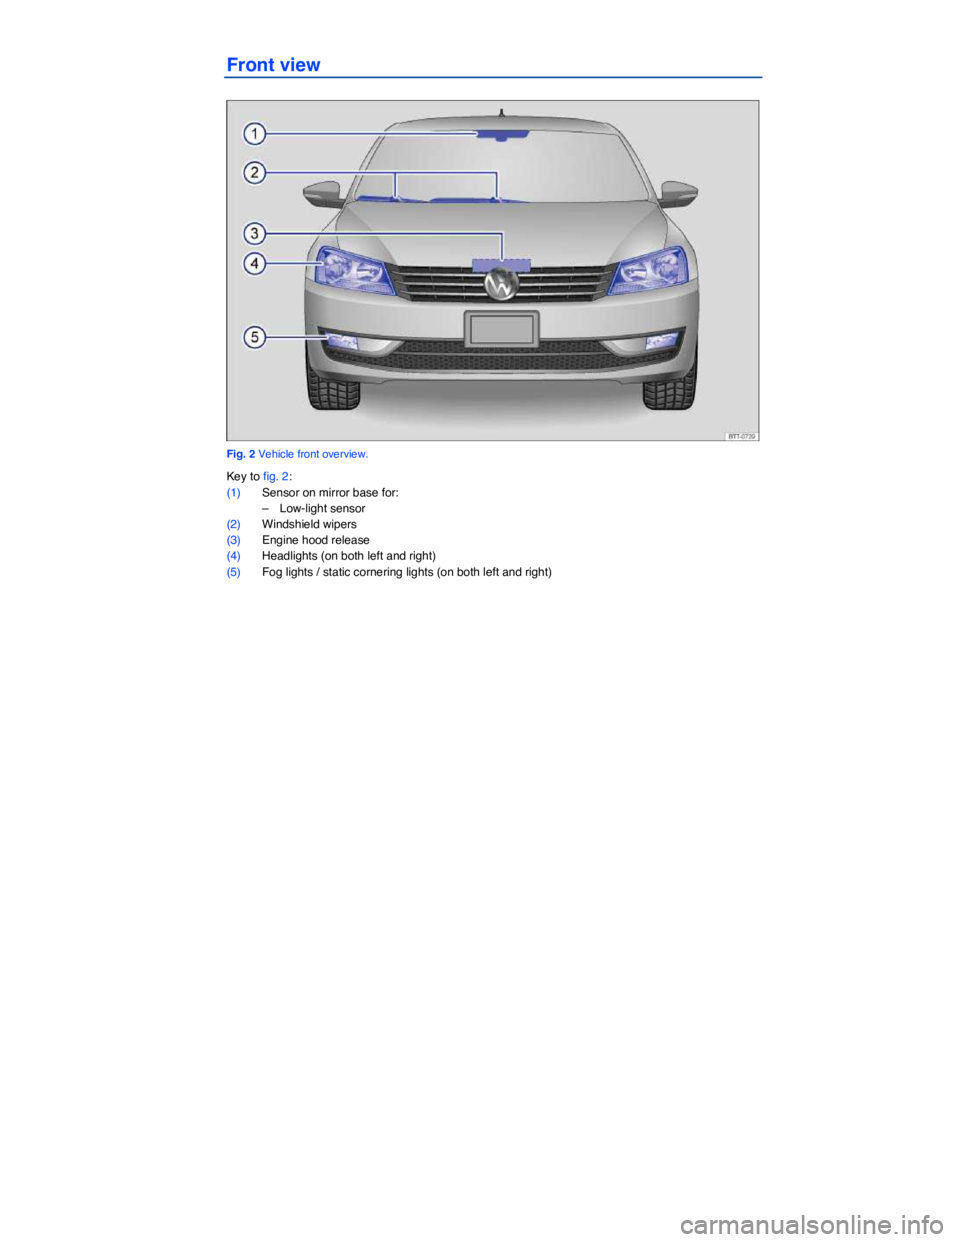 VOLKSWAGEN PASSAT 2012  Owners Manual  
Front view 
 
Fig. 2 Vehicle front overview. 
Key to fig. 2: 
(1) Sensor on mirror base for: 
–  Low-light sensor  
(2) Windshield wipers  
(3) Engine hood release  
(4) Headlights (on both left a